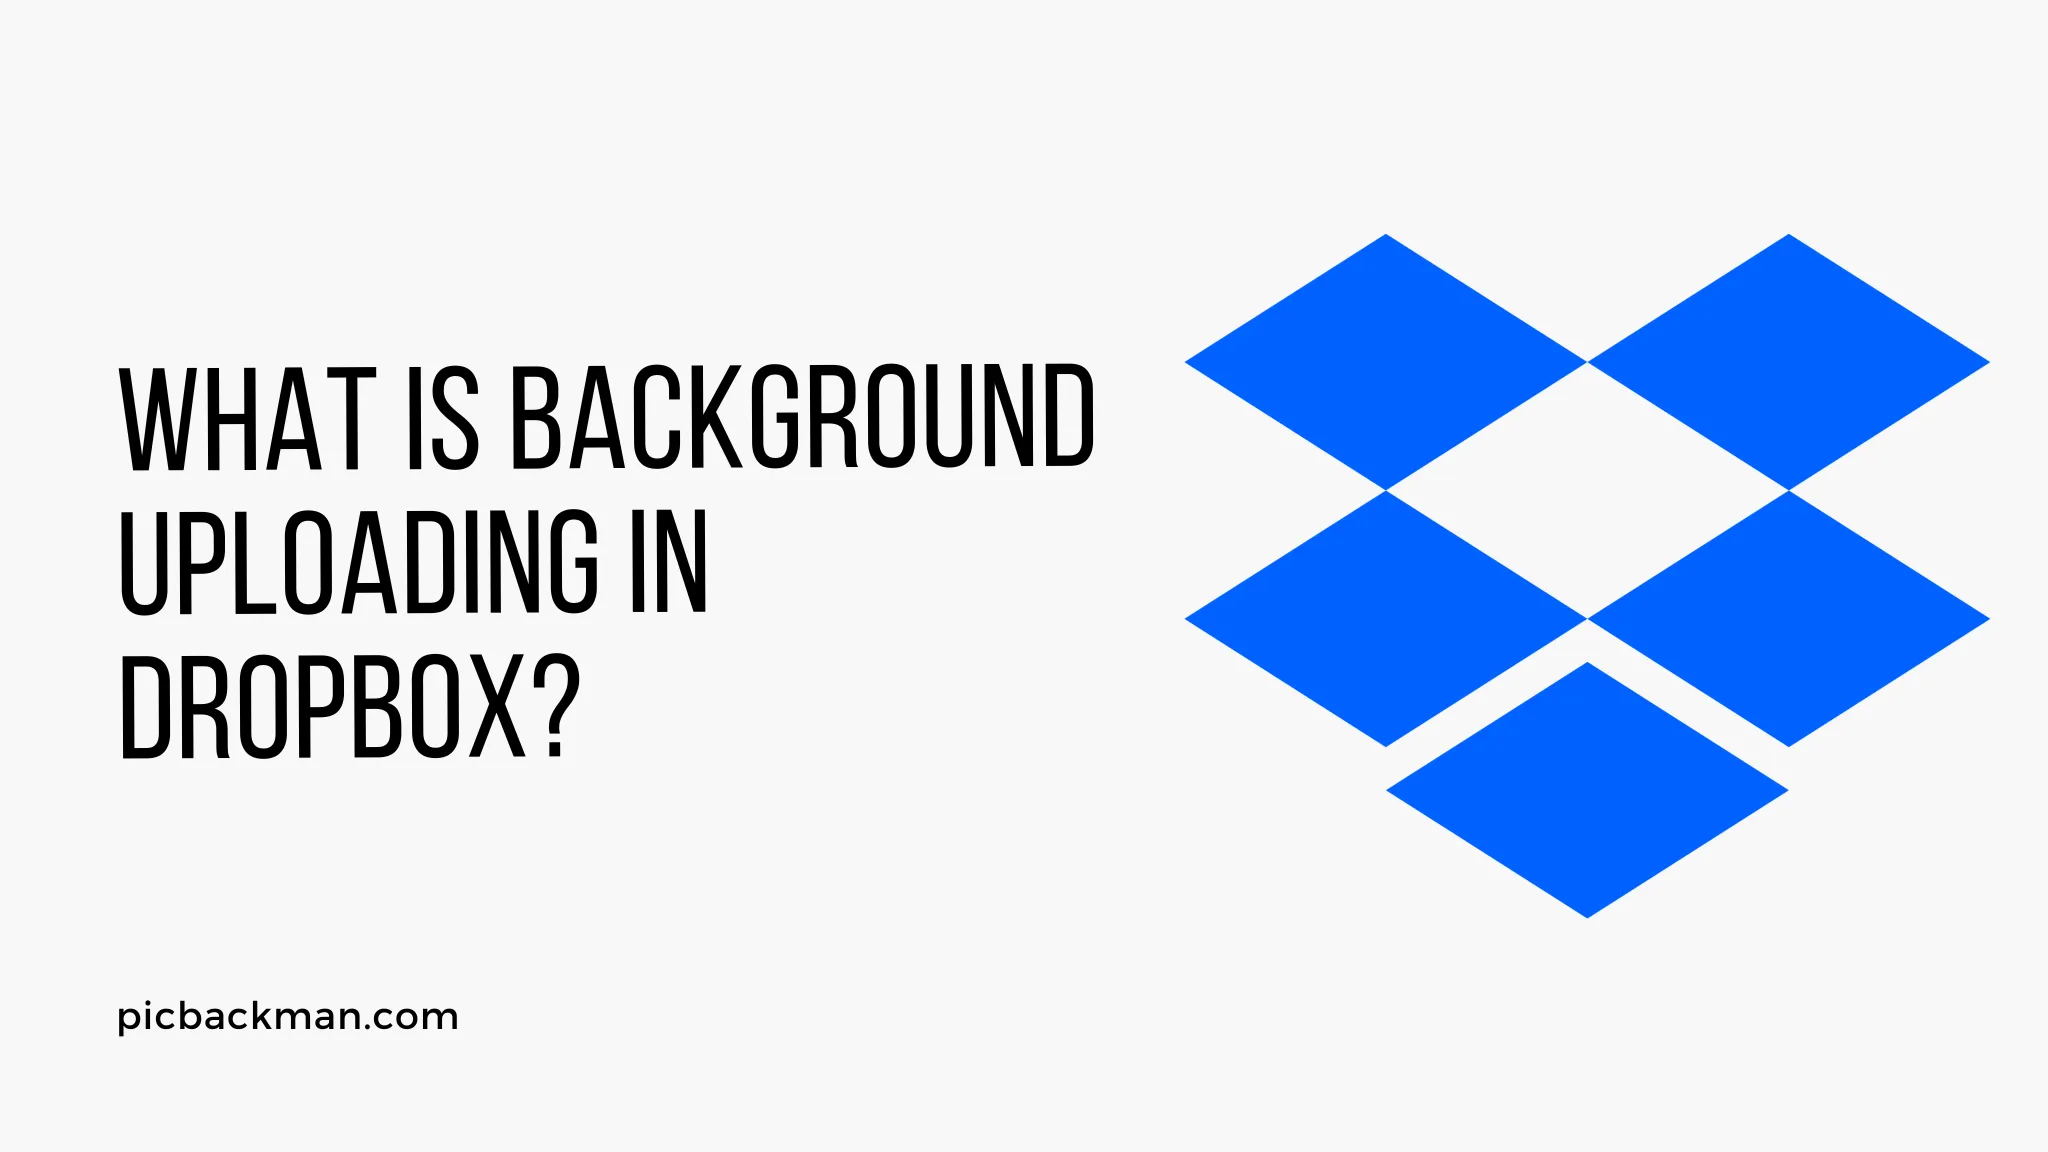 What is Background Uploading in Dropbox?